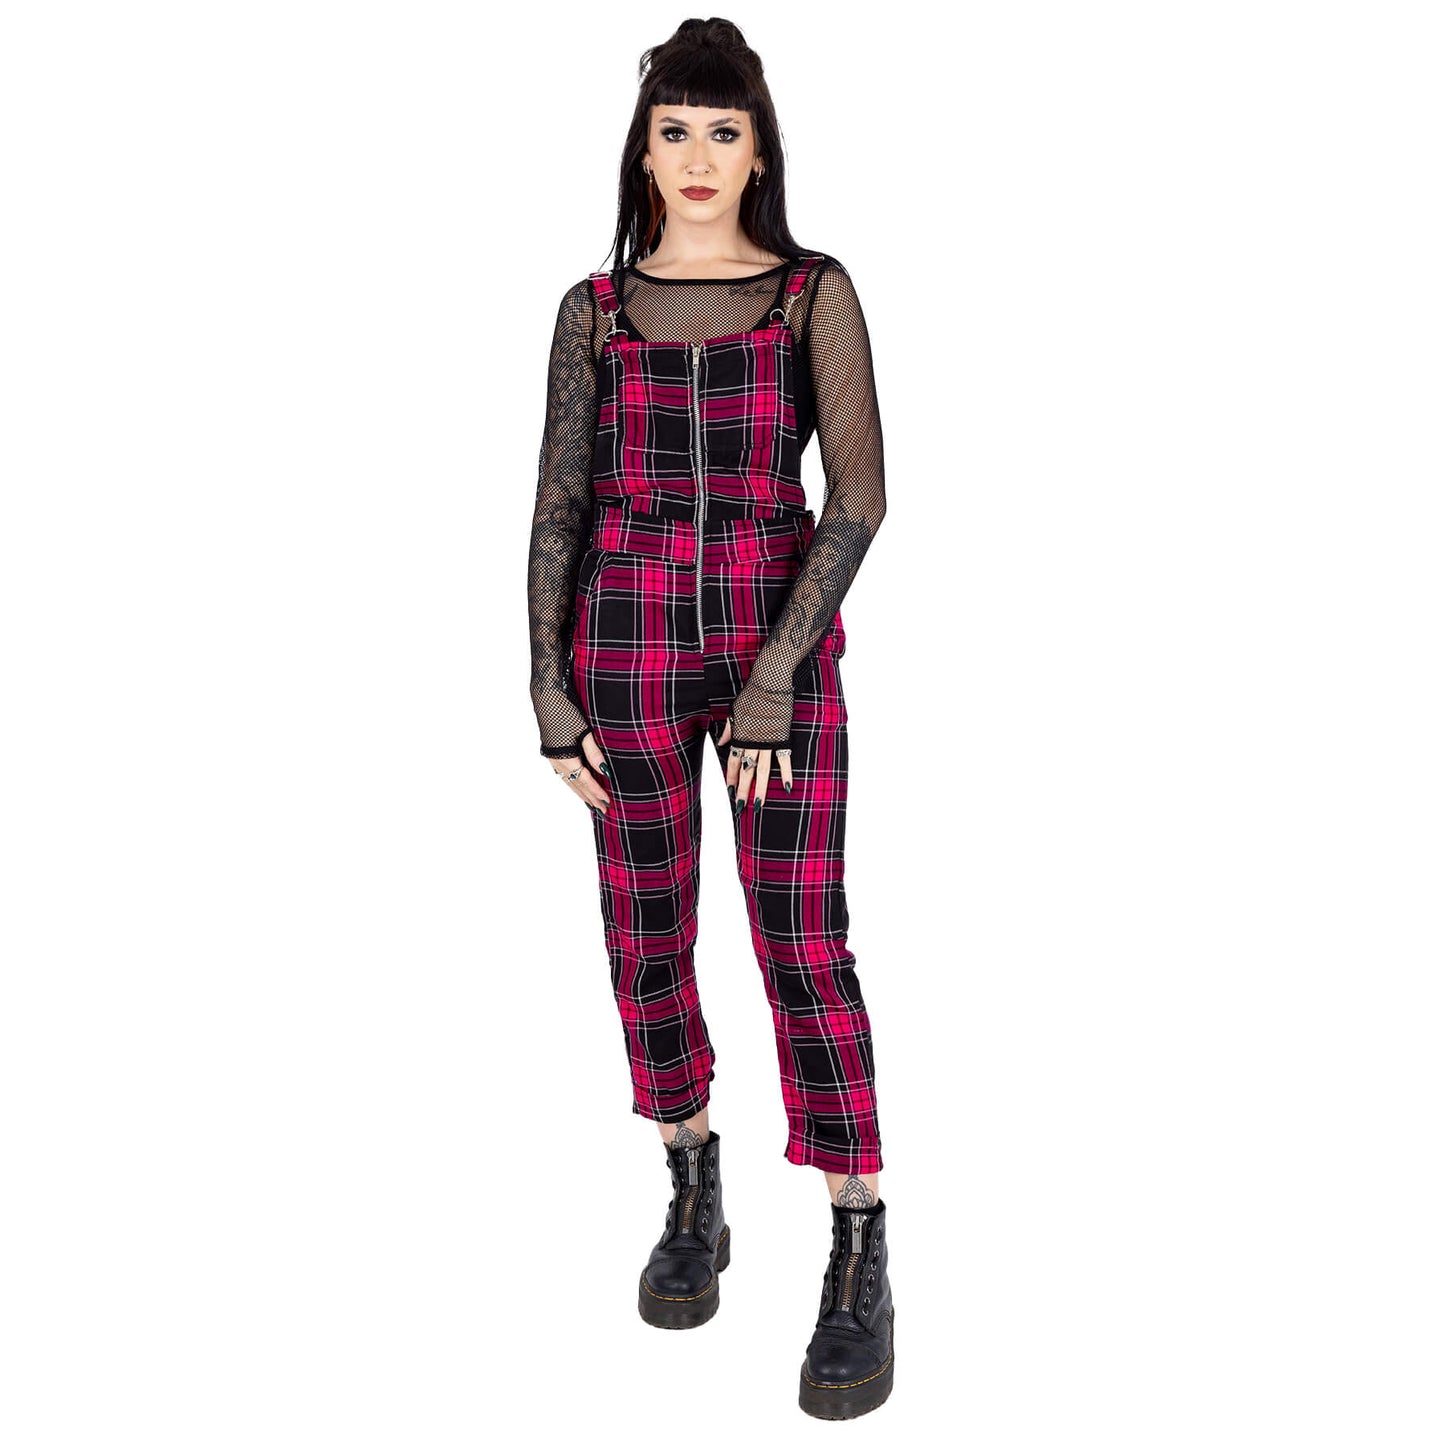 Chemical Black Asha Dungarees - Black and Pink - Kate's Clothing